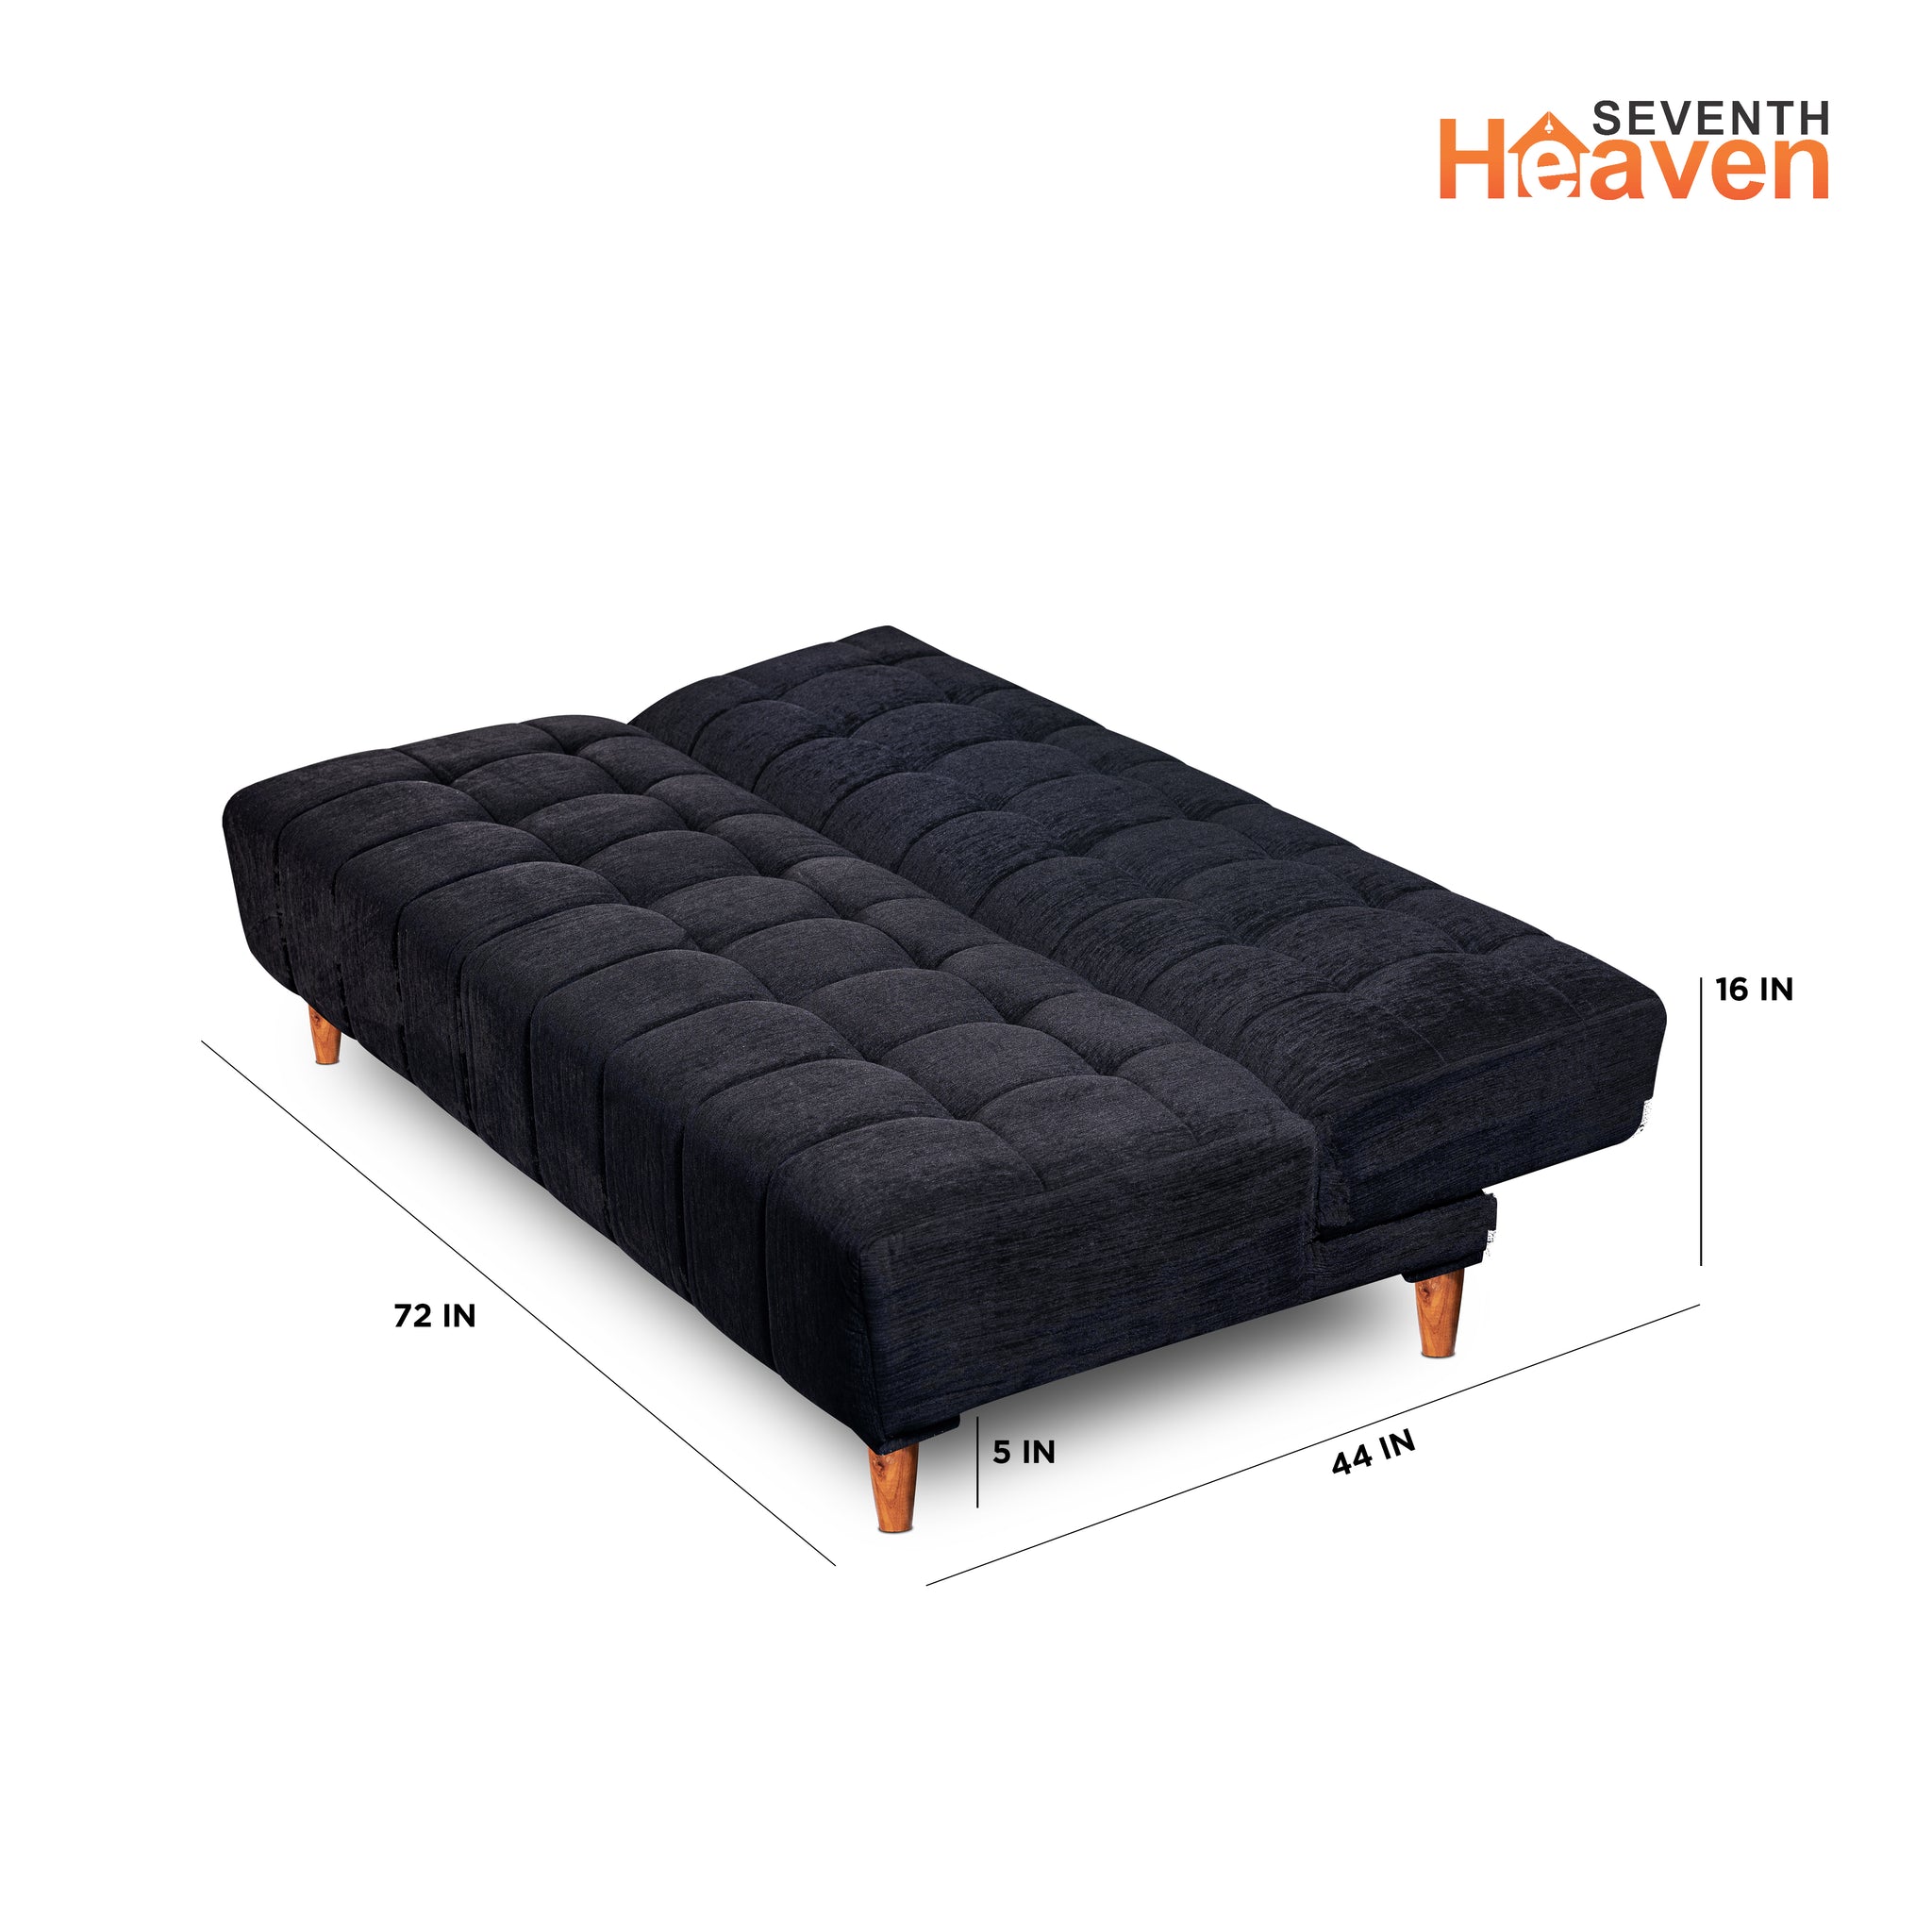 Seventh Heaven Florida 4 Seater Wooden Sofa Cum Bed. Modern & Elegant Smart Furniture Range for luxurious homes, living rooms and offices. Use as a sofa, lounger or bed. Perfect for guests. Molphino fabric with sheesham polished wooden legs. Black colour.